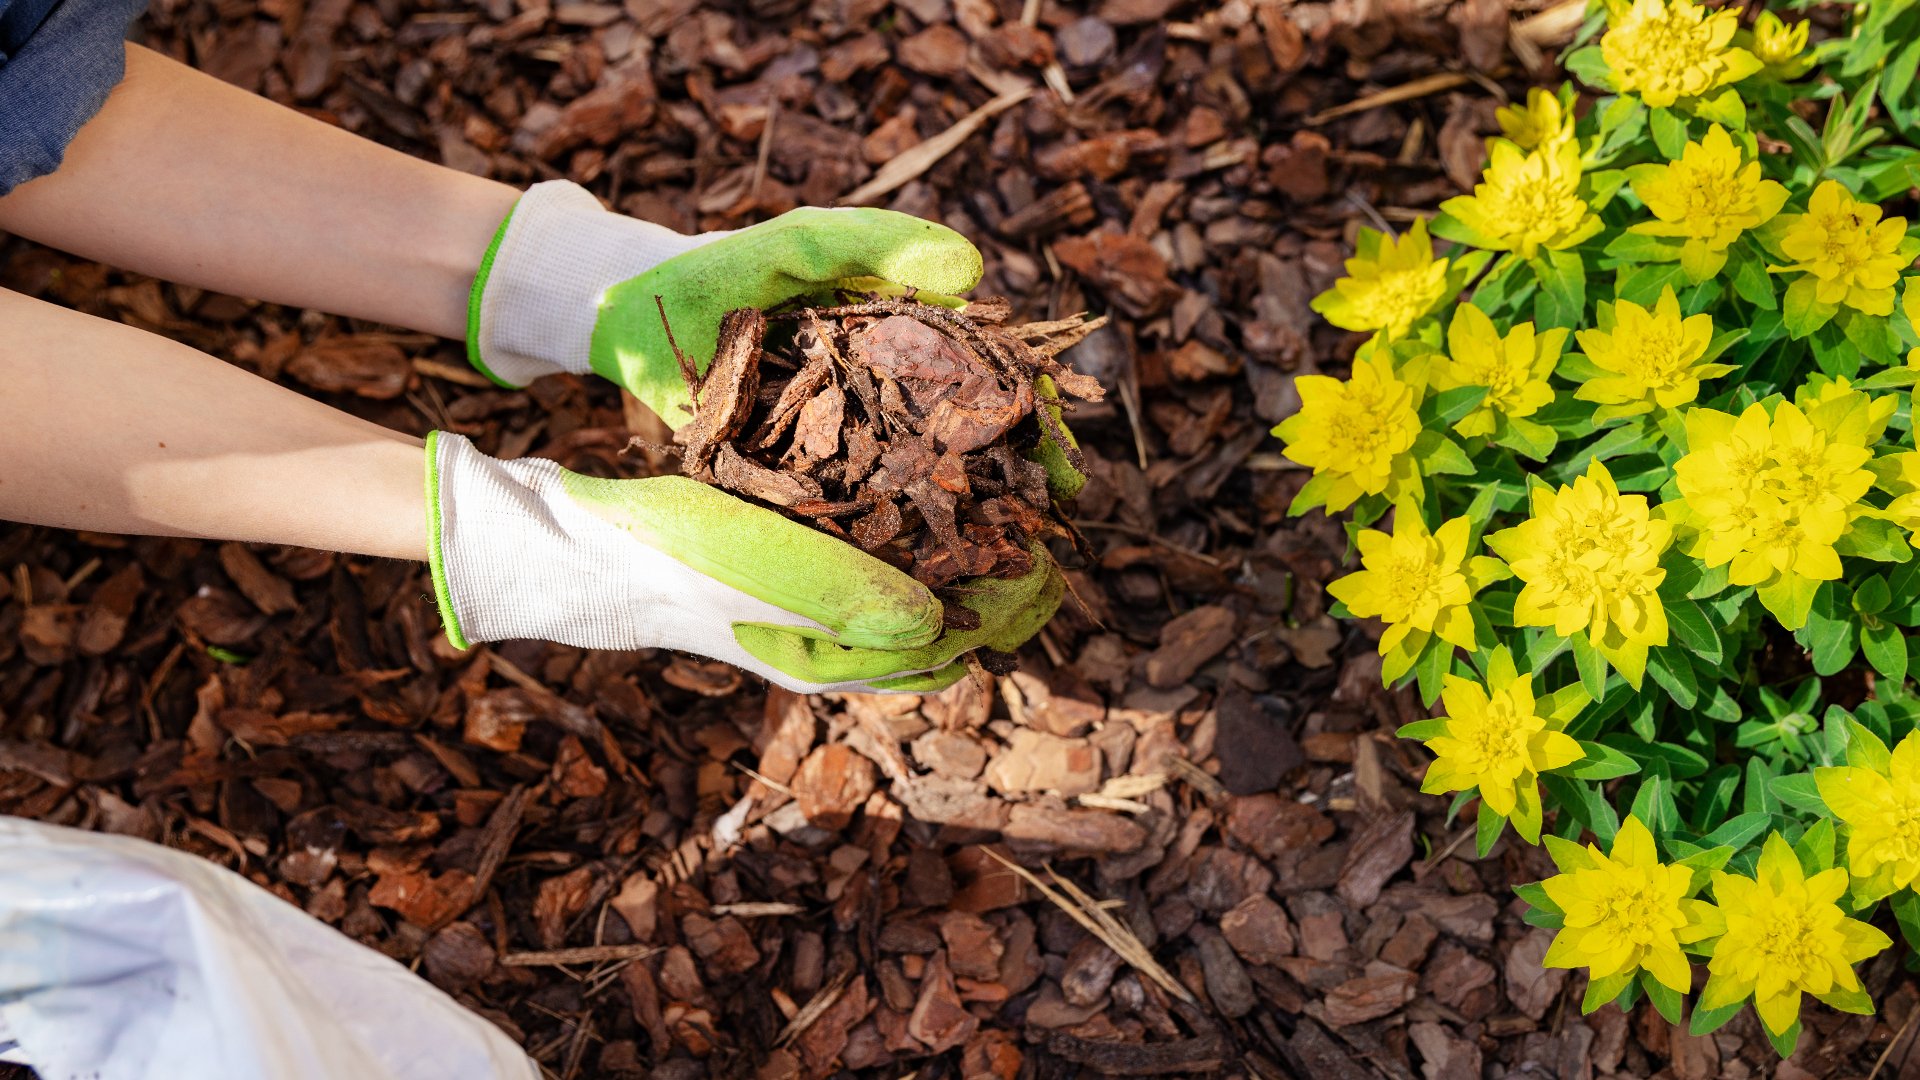 Mulch Matters! Make Sure You Add Mulch to Your Landscape Beds